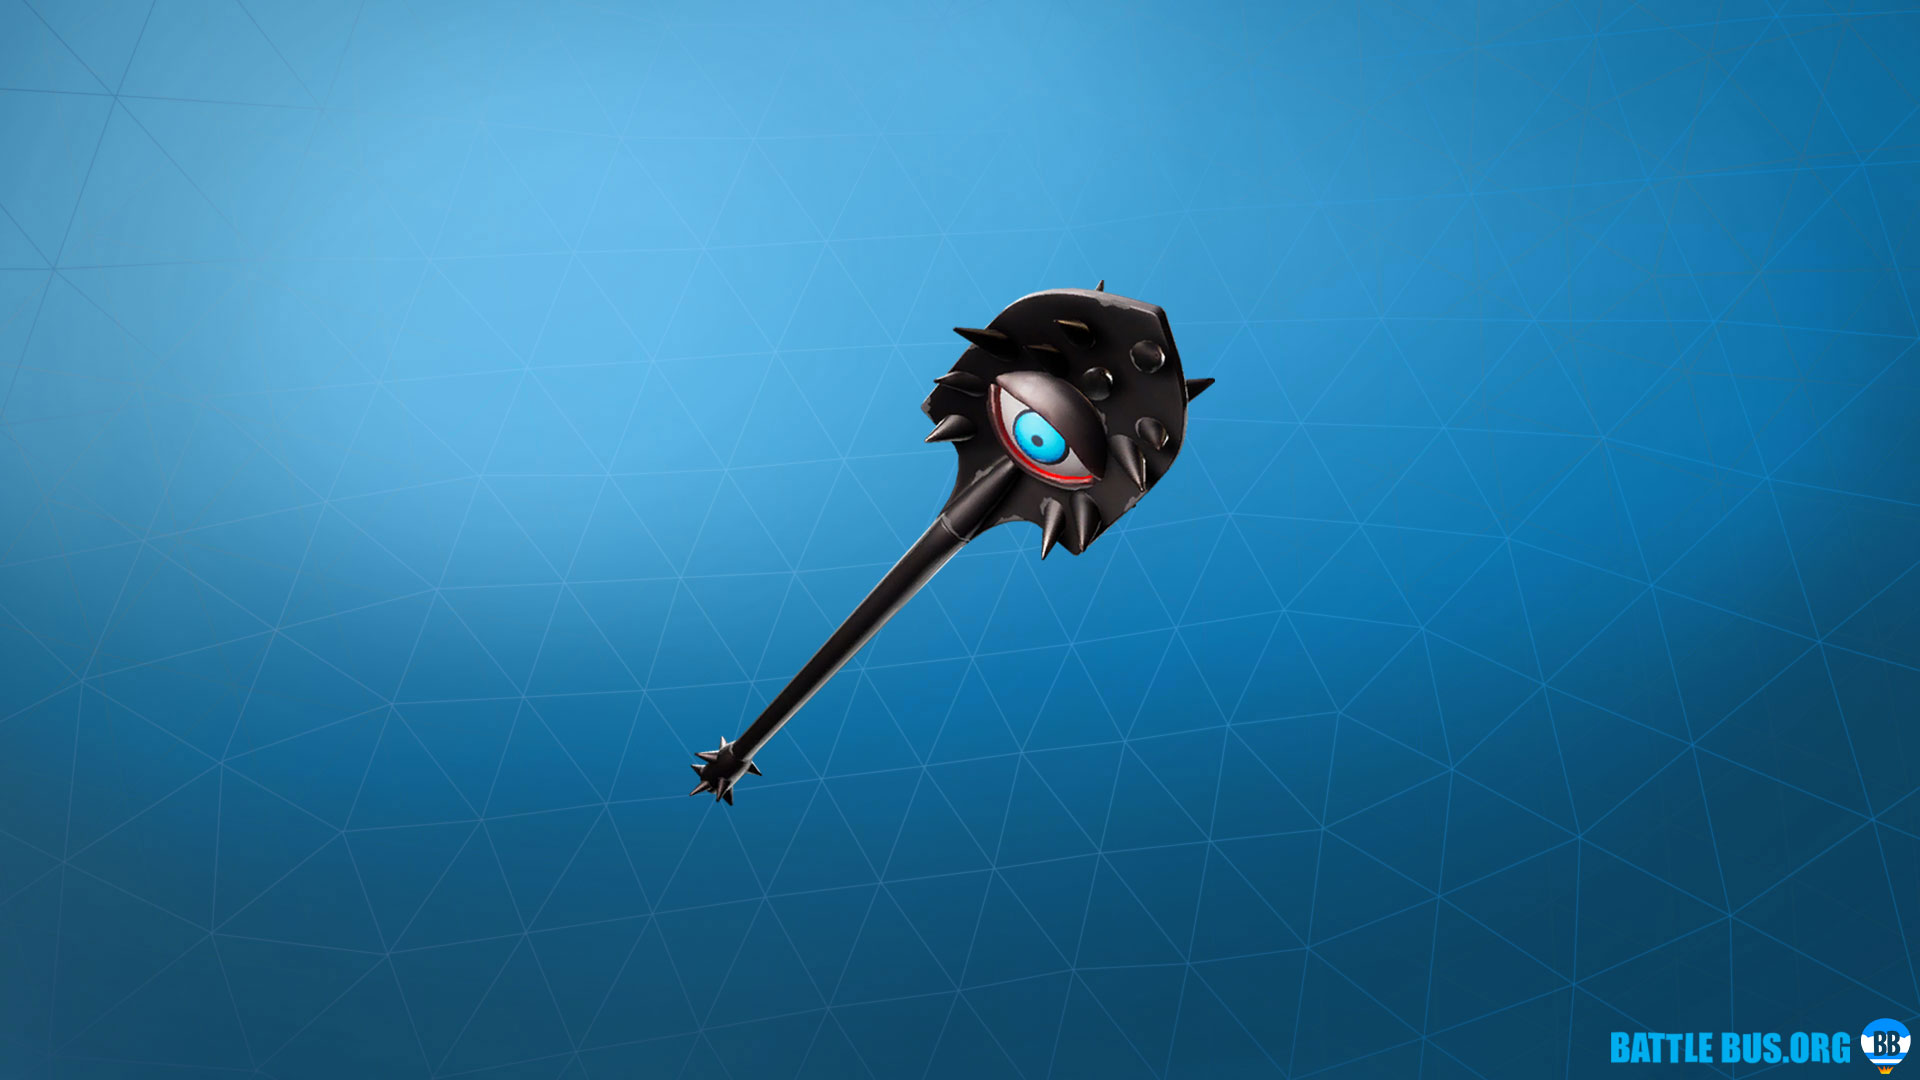 Free download vision pickaxe ouroboros set fortnite news skins settings x for your desktop mobile tablet explore paradox fortnite wallpapers fortnite wallpaper fortnite wallpapers maven fortnite wallpapers